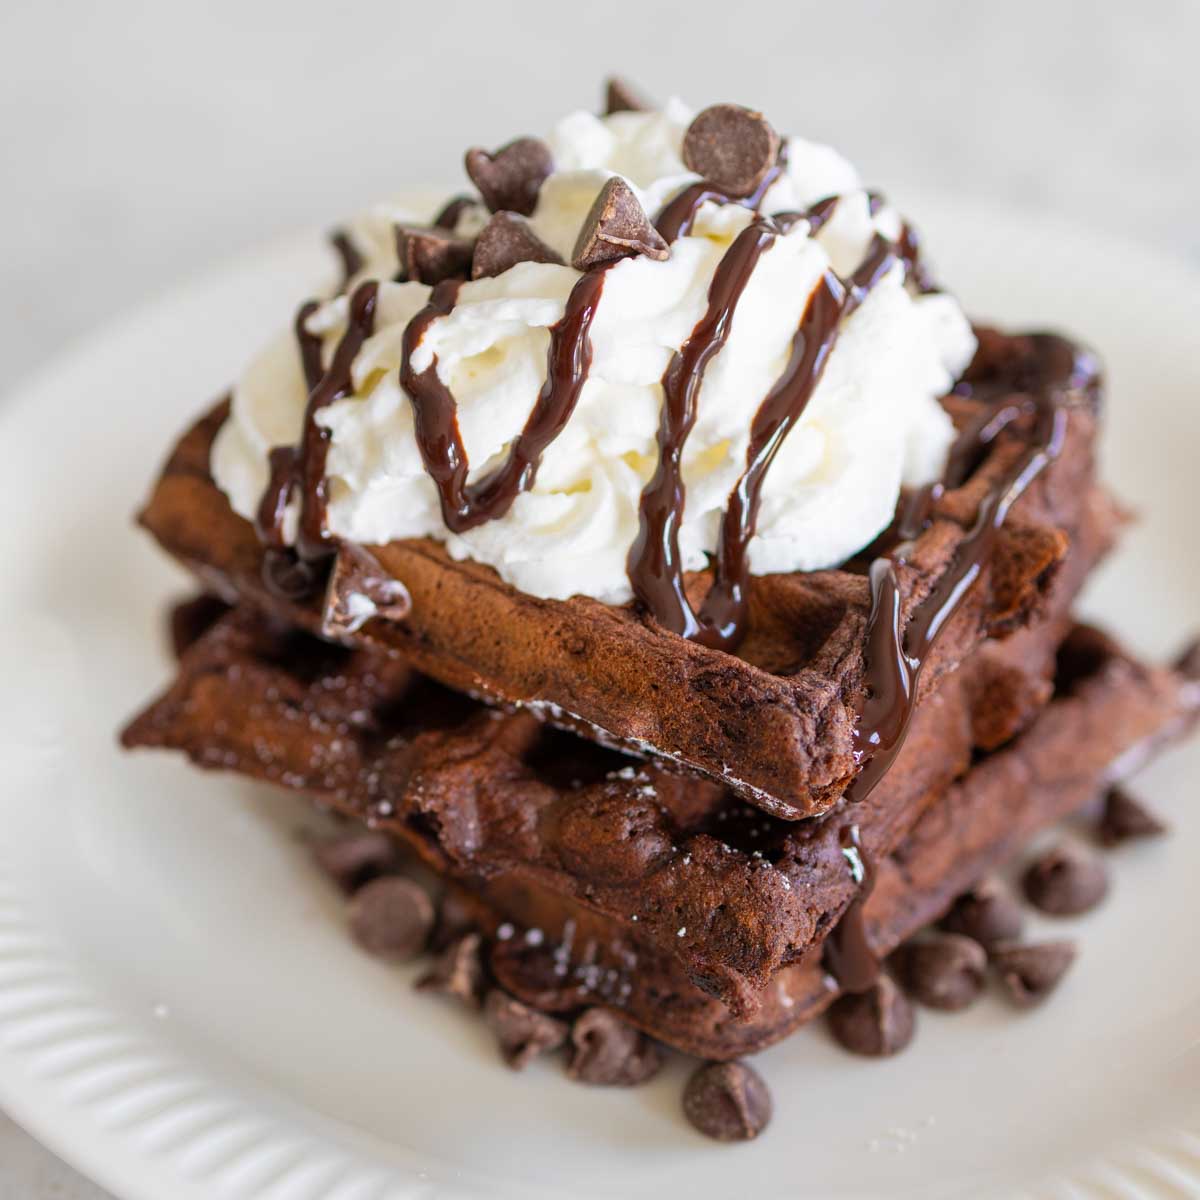 A stack of Belgian Chocolate Waffles with whipped cream and a chocolate drizzle.